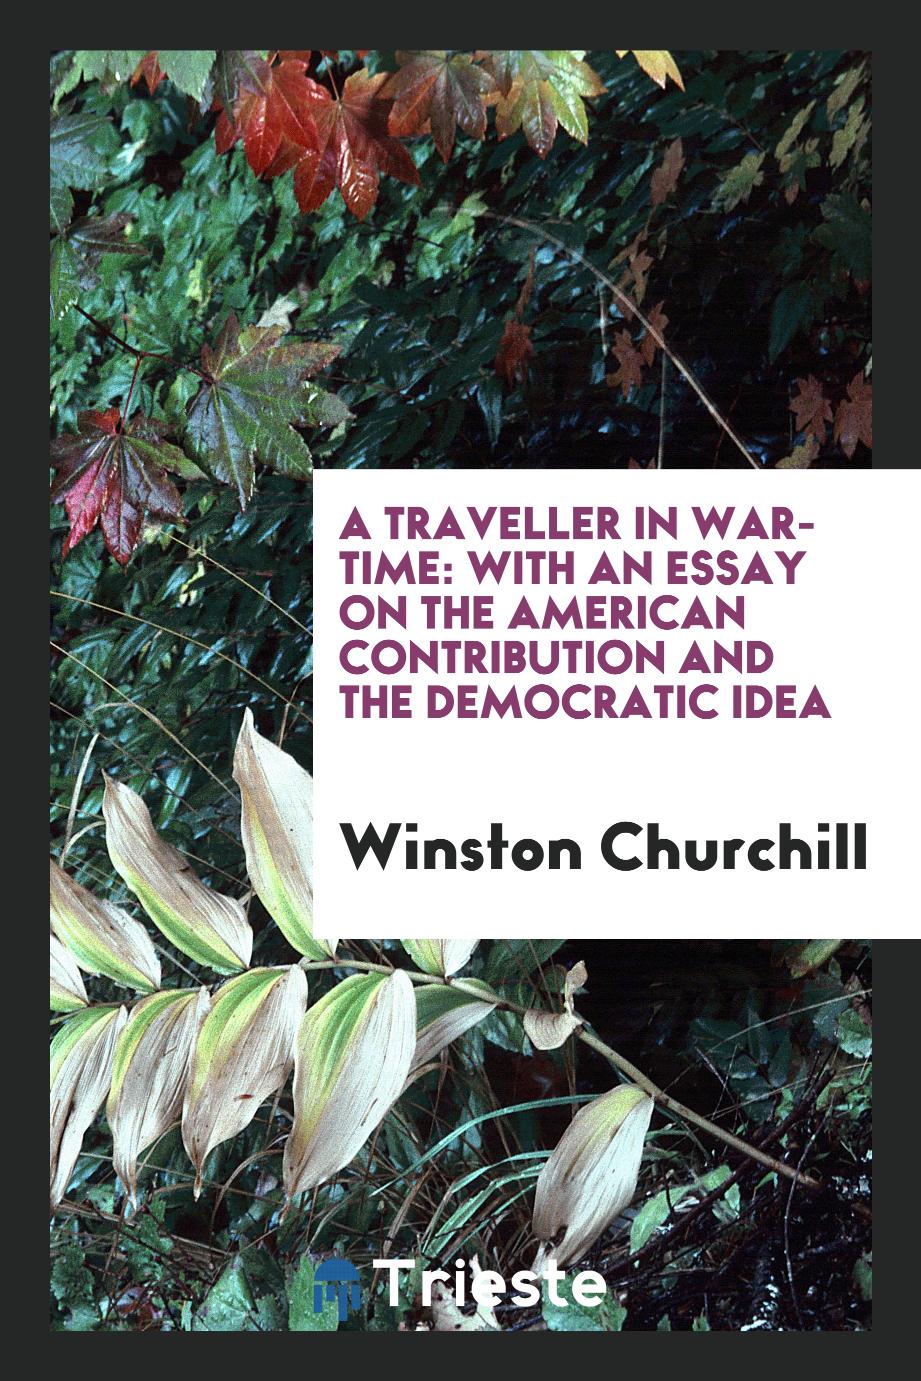 A traveller in war-time: with an essay on the American contribution and the democratic idea